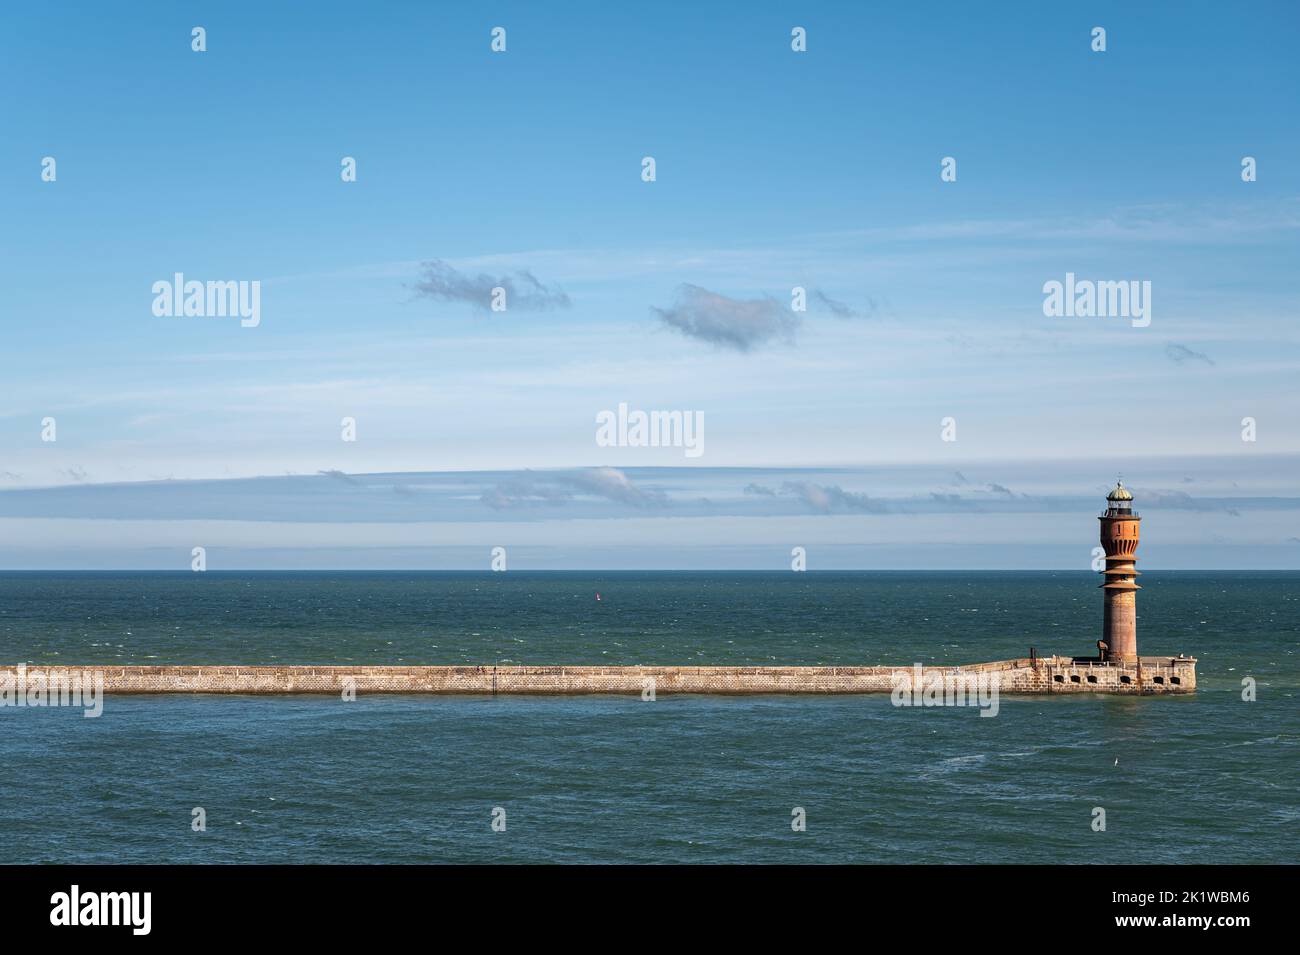 Europe, France, Dunkerque - July 9, 2022: Feu de Saint Pol, light tower, at end of its pier seen from inside harbor looking ove North Sea under blue c Stock Photo